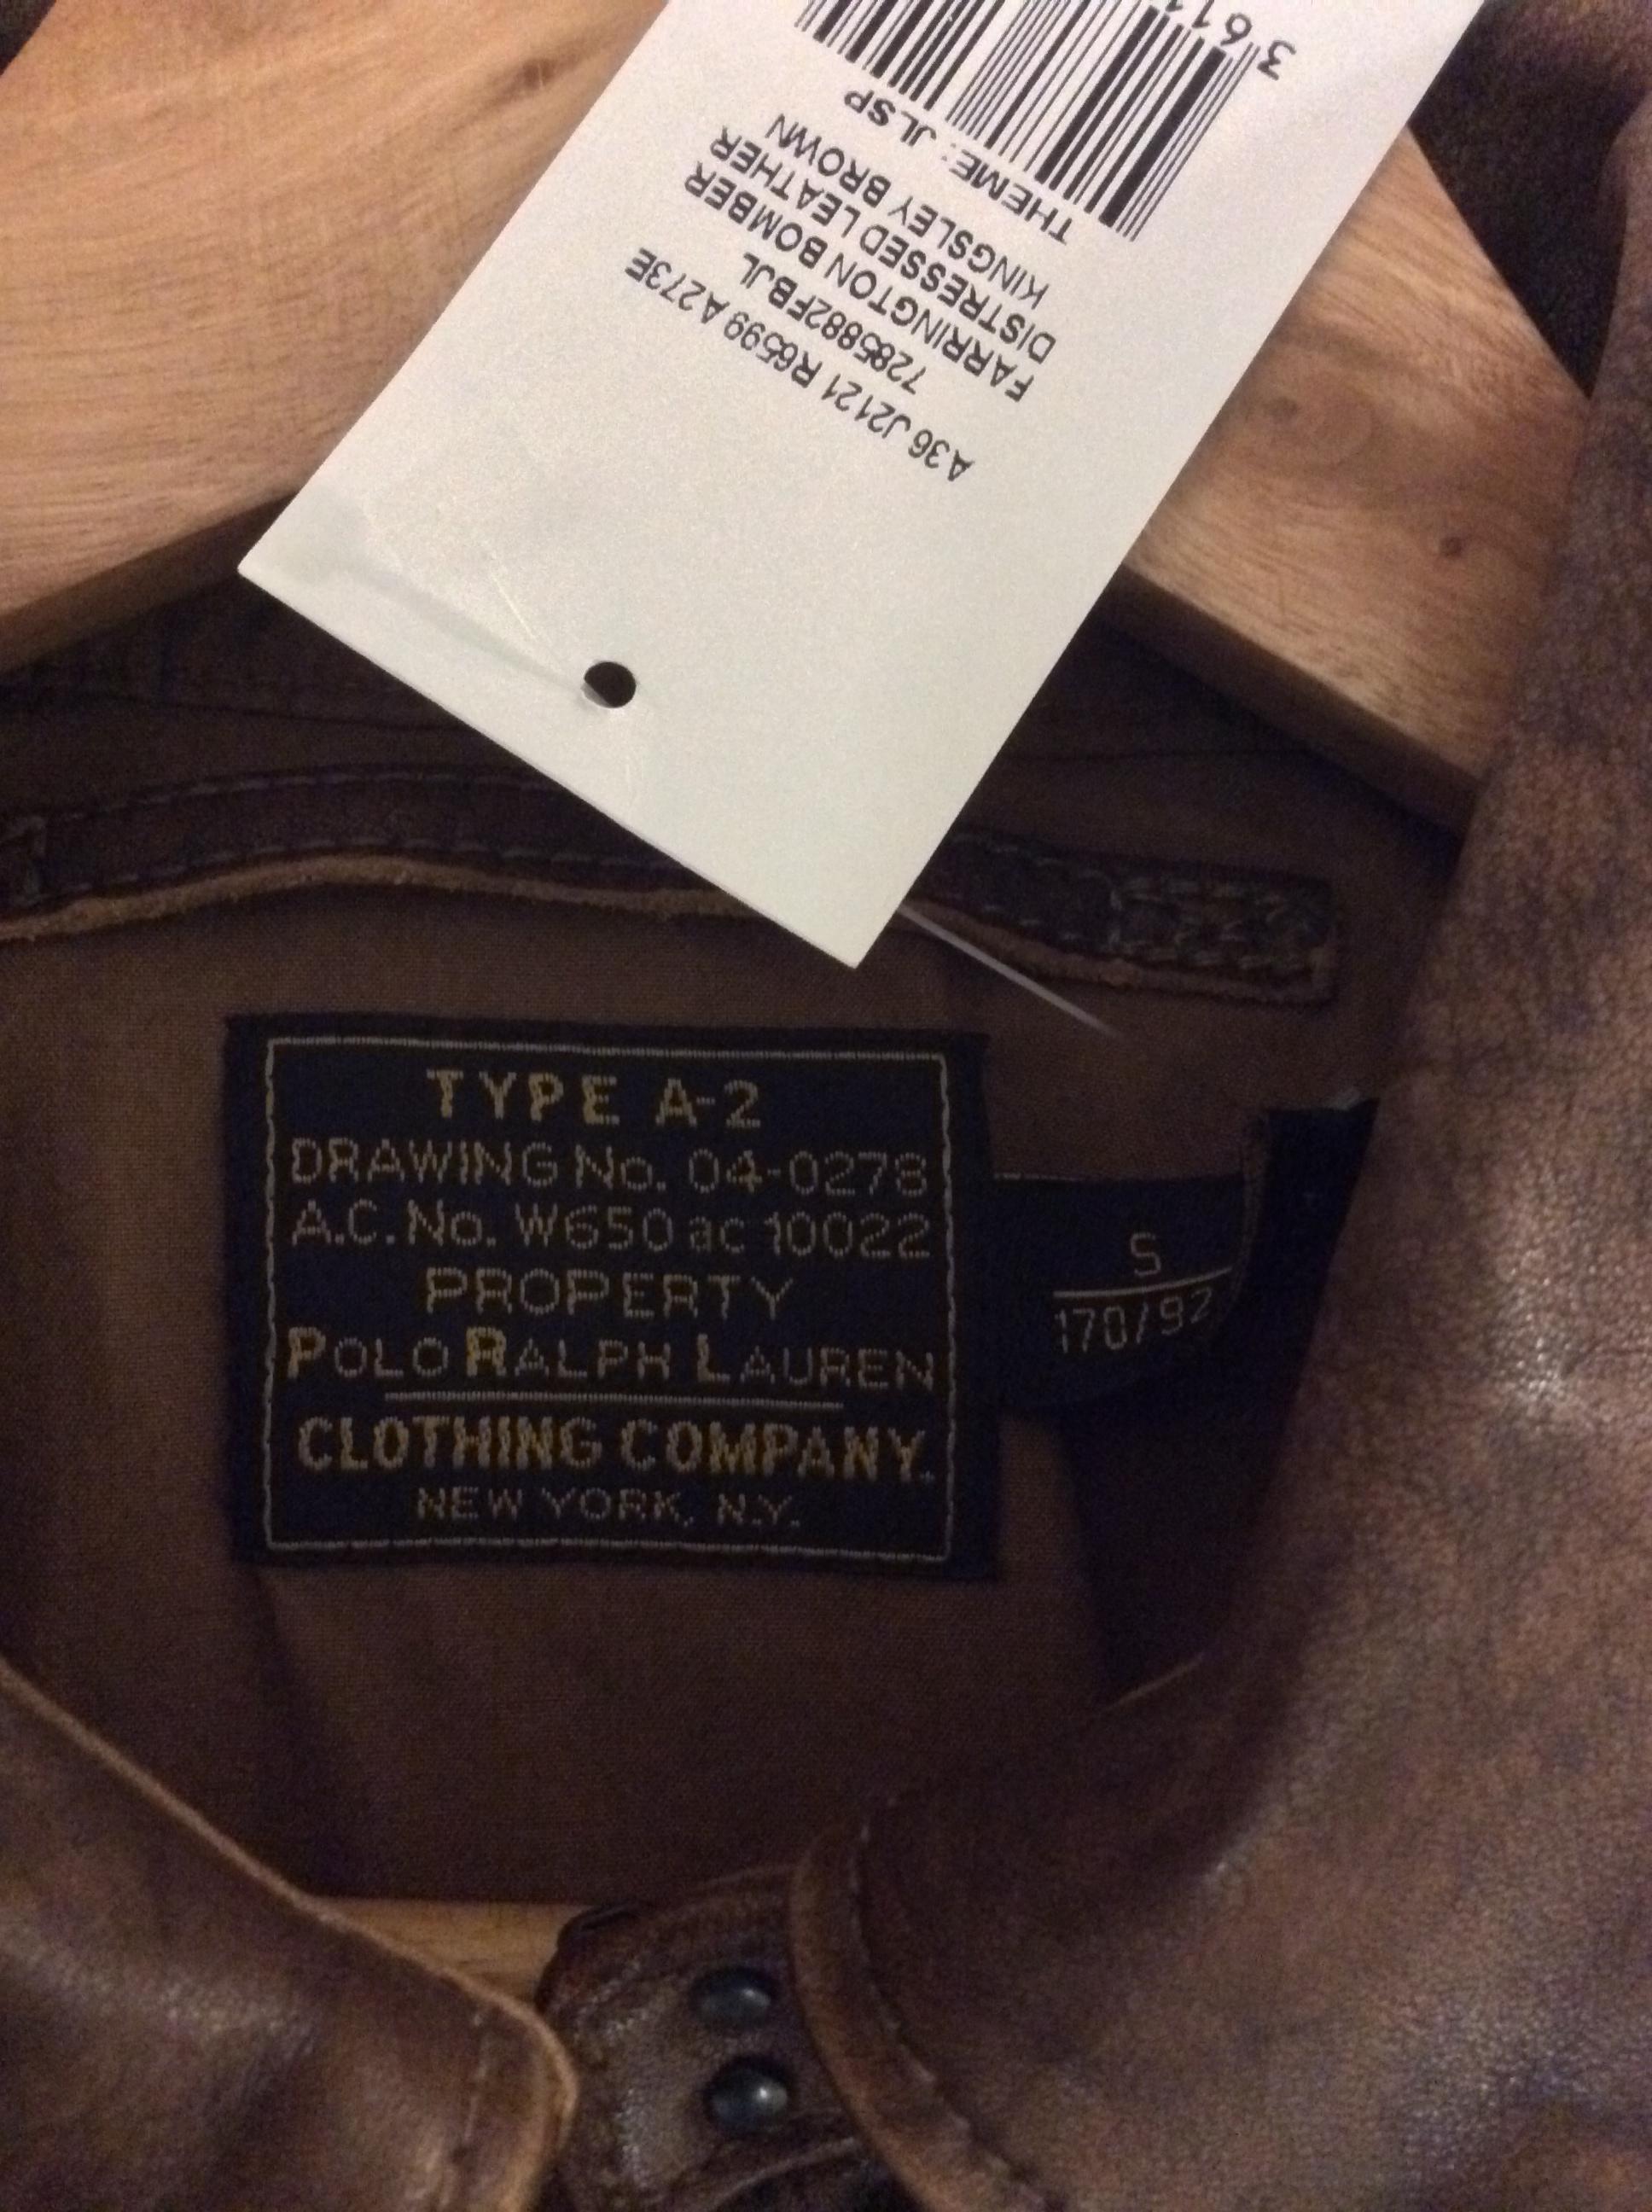 Find or flop? Was hoping for RRL A-2 jacket, got a PRL | Styleforum